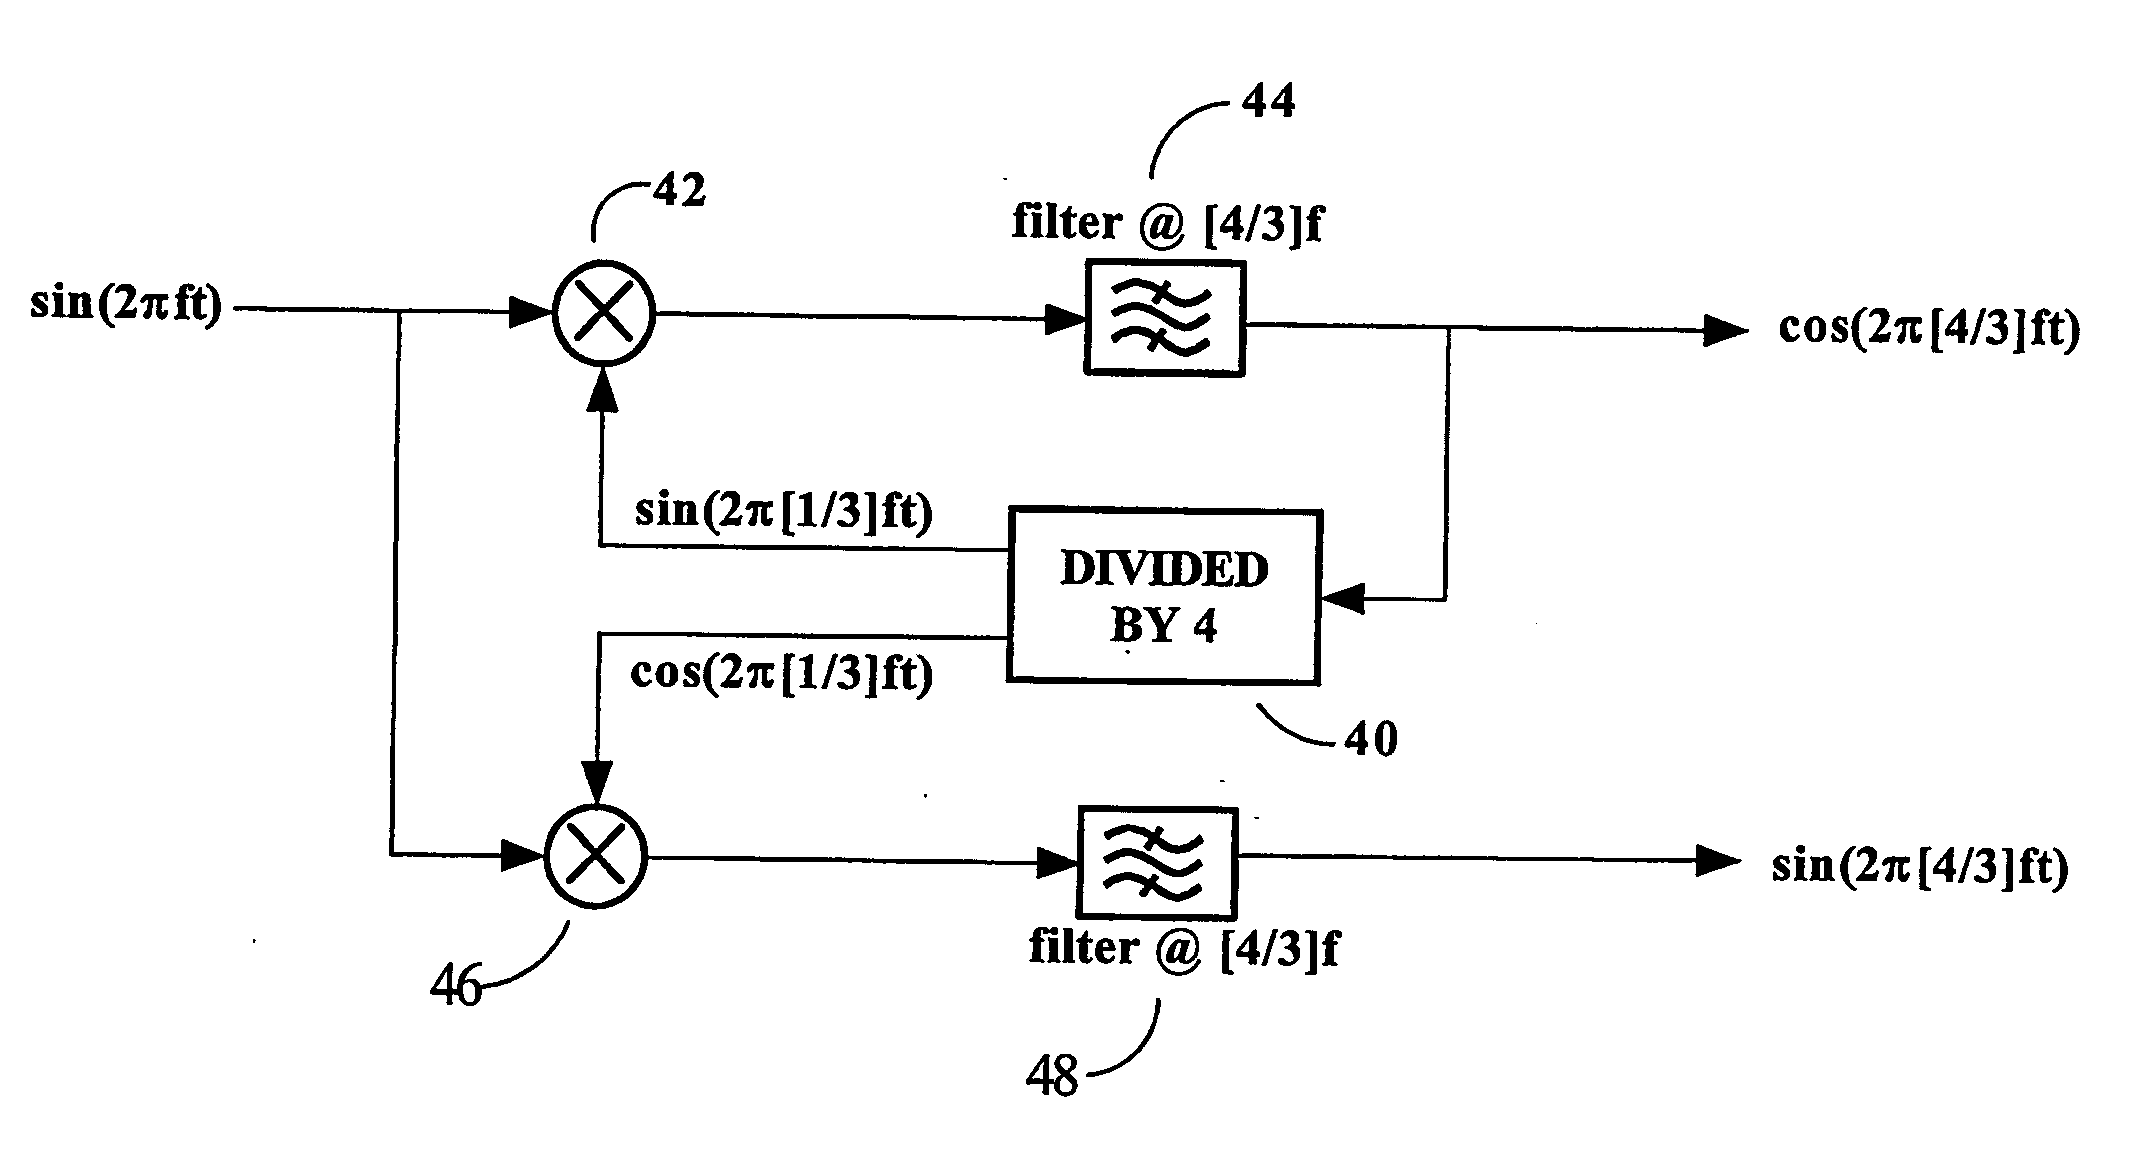 Regenerative divider for up and down conversion of radio frequency (rf) signals